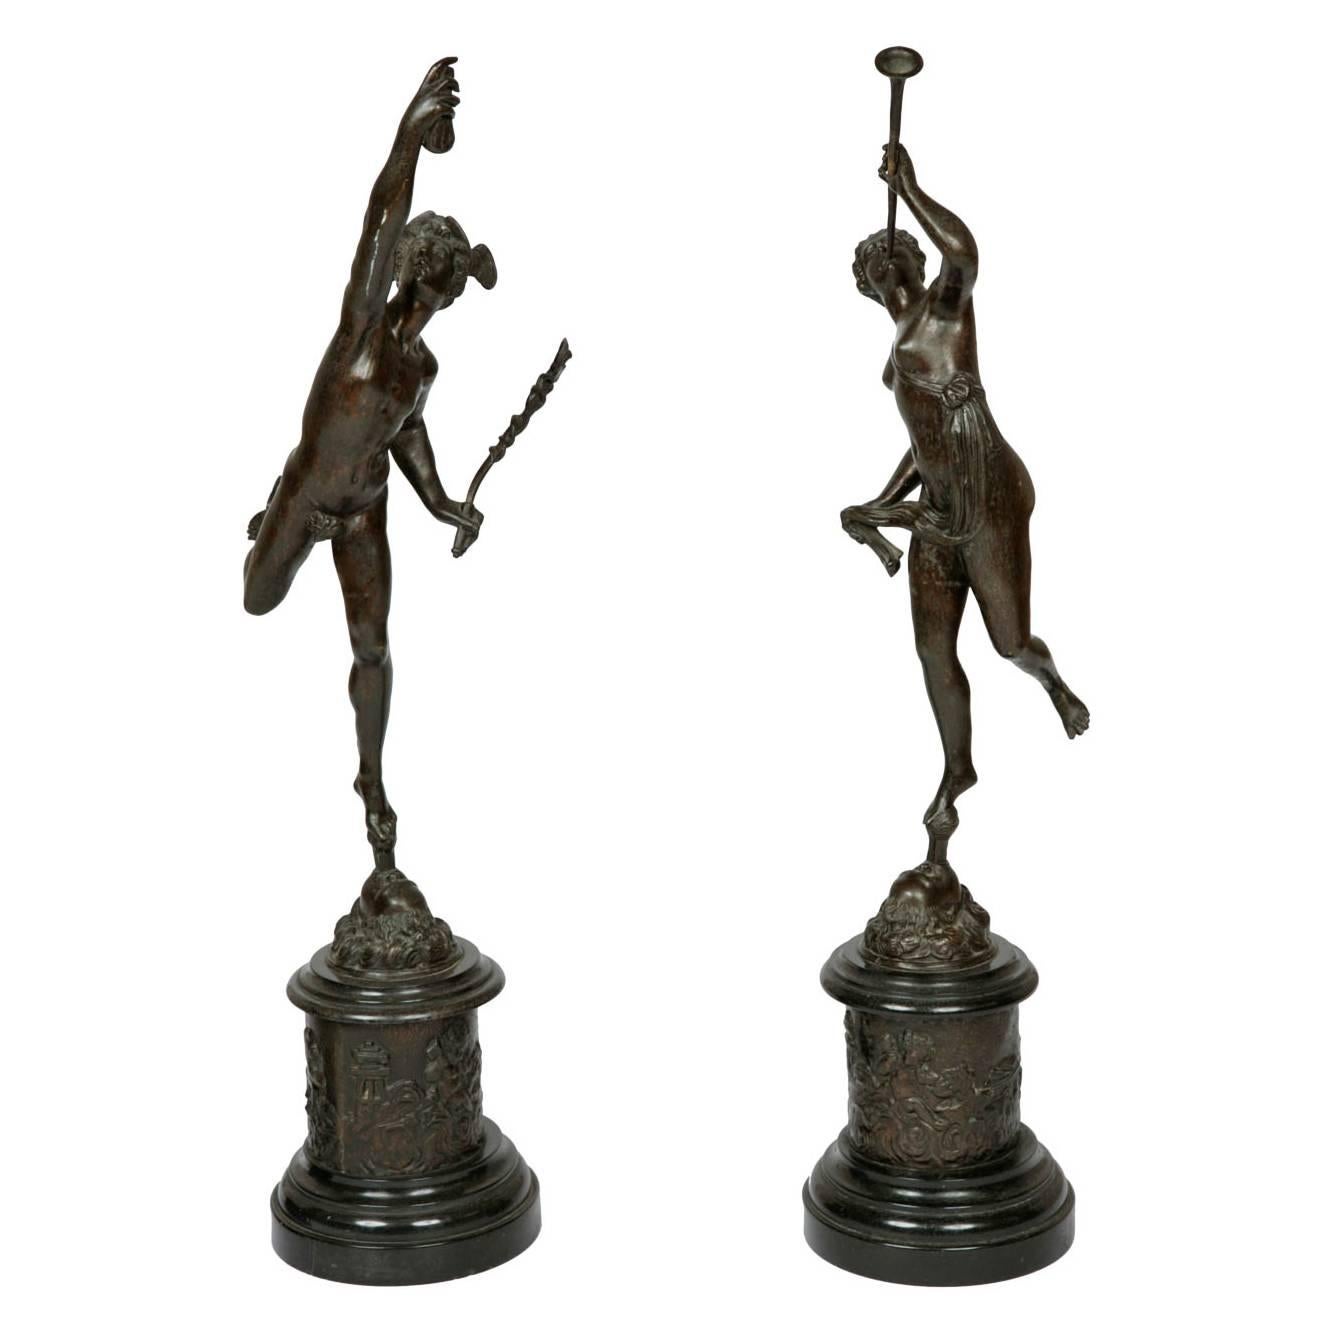 Classical Bronze Sculptures of Mercury and Fortuna after Giambologna